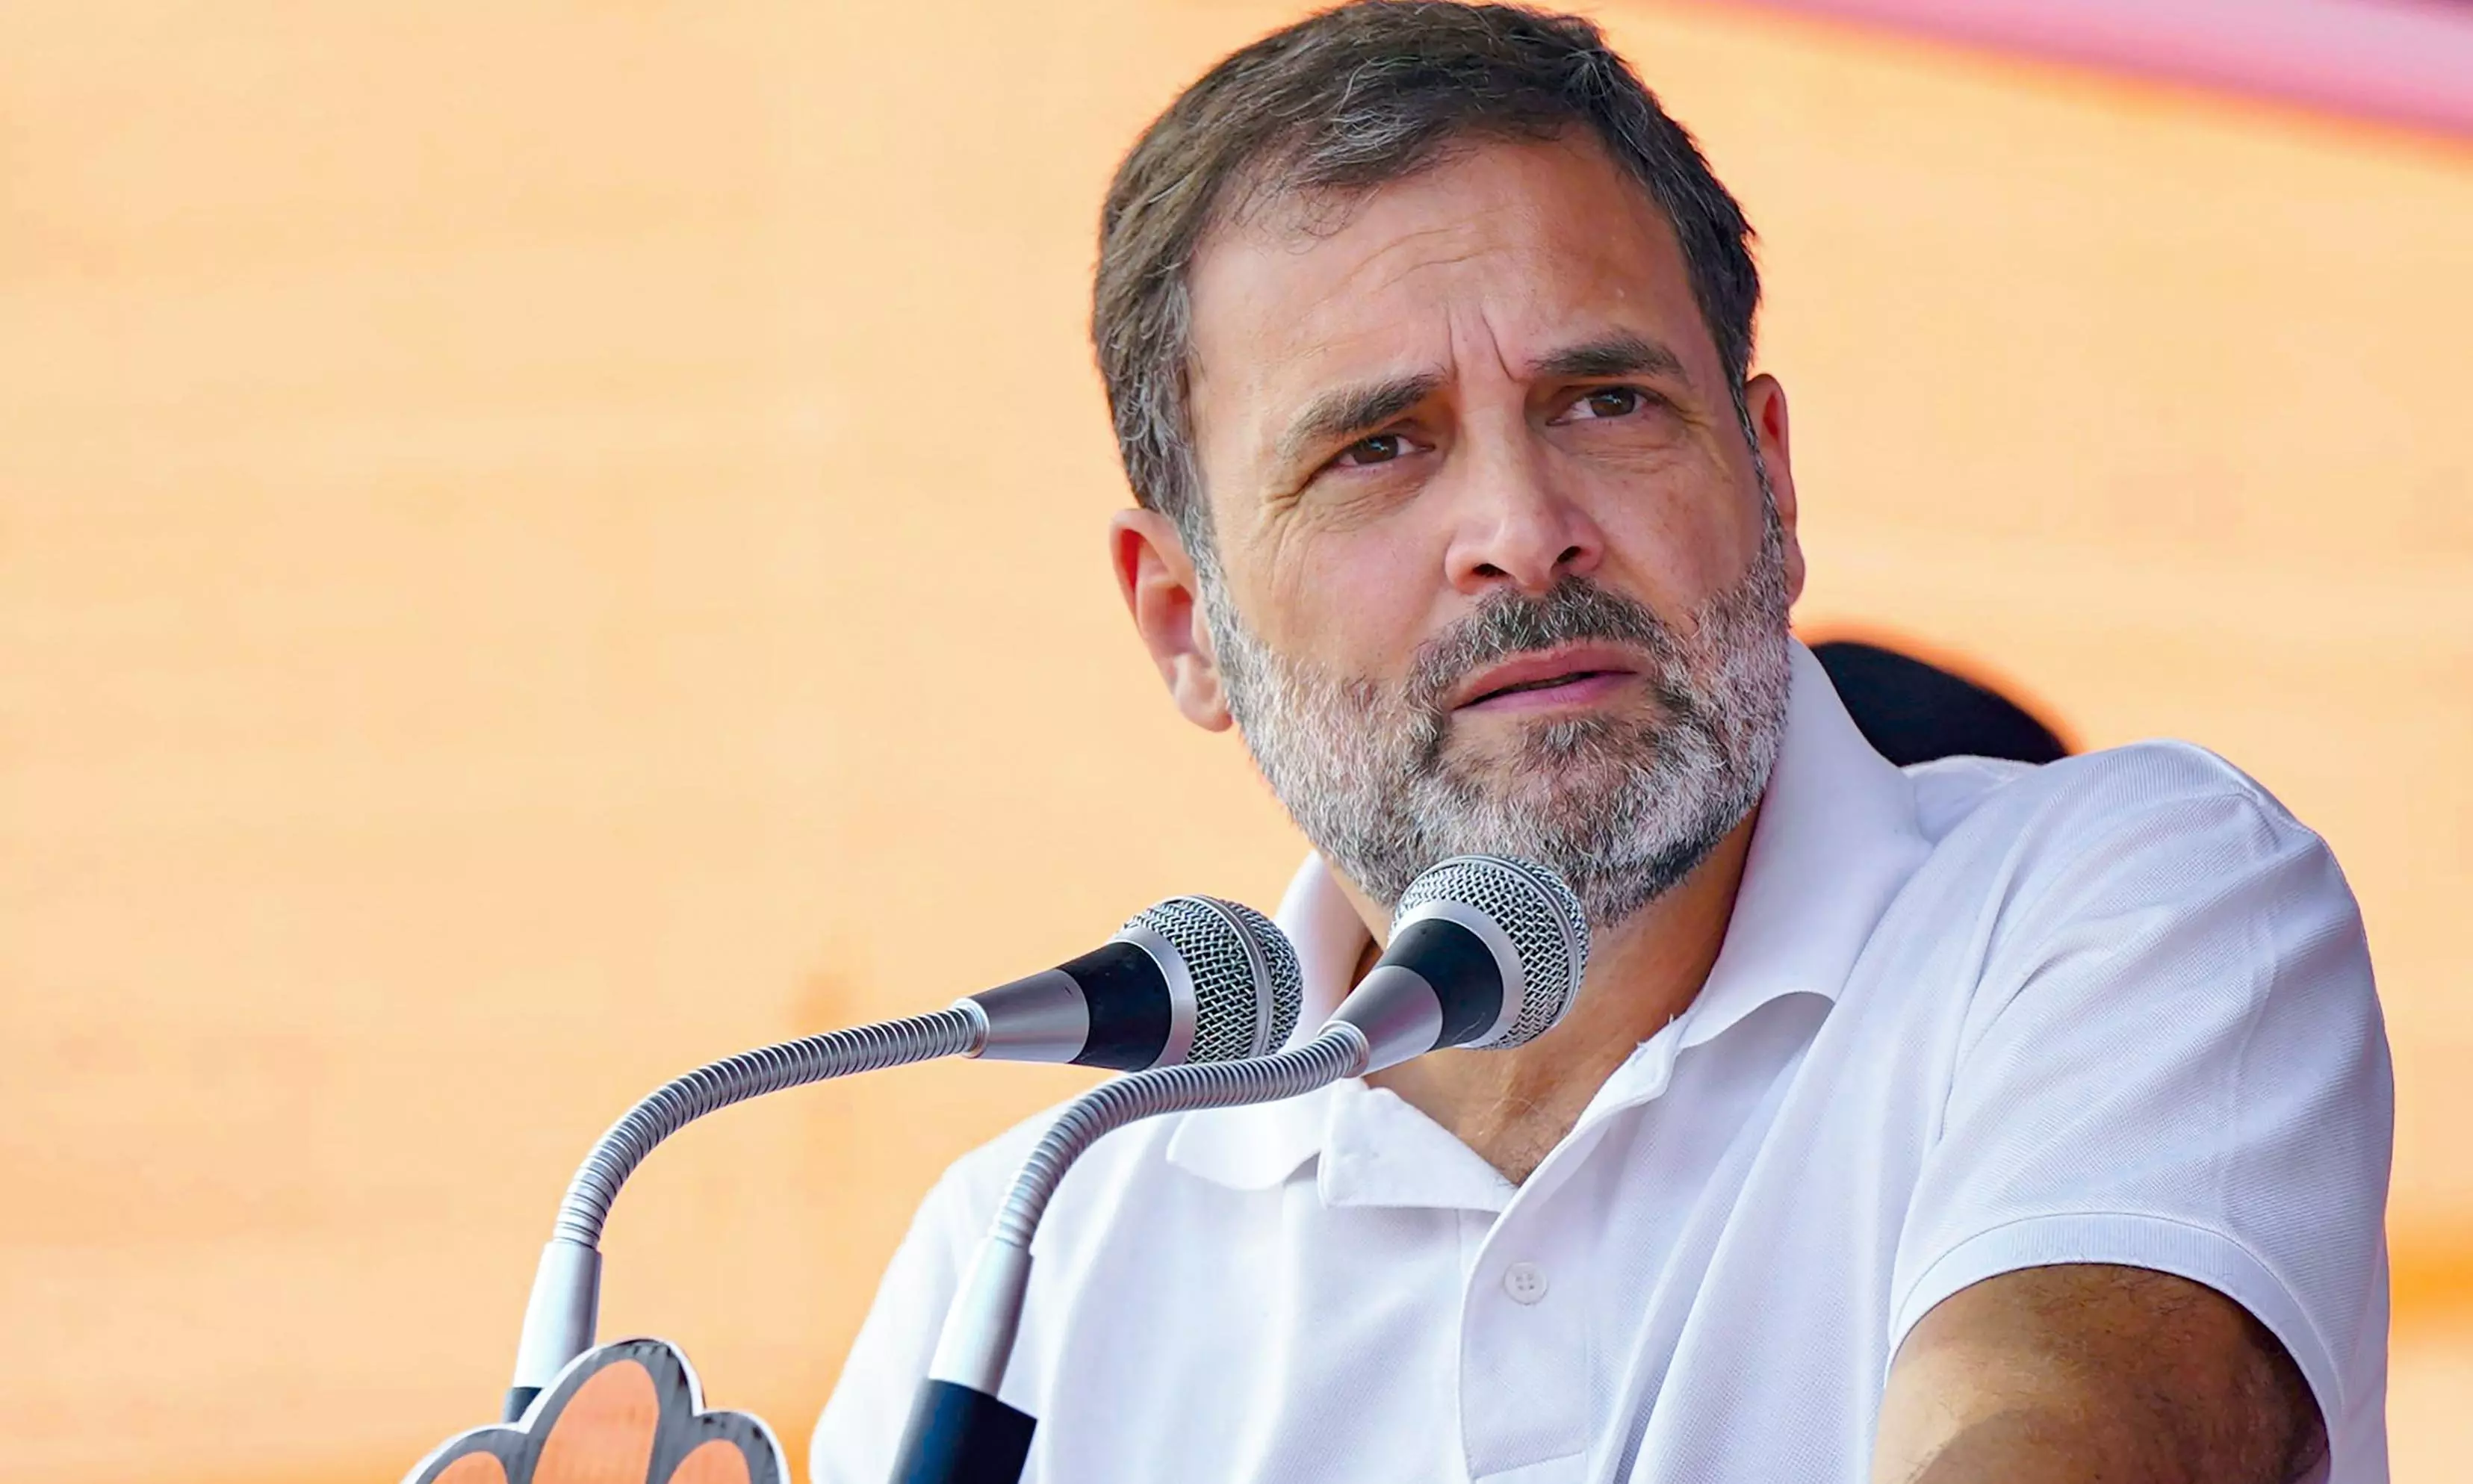 Cong will implement Rajasthan’s healthcare model across India if voted to power in 2024: Rahul